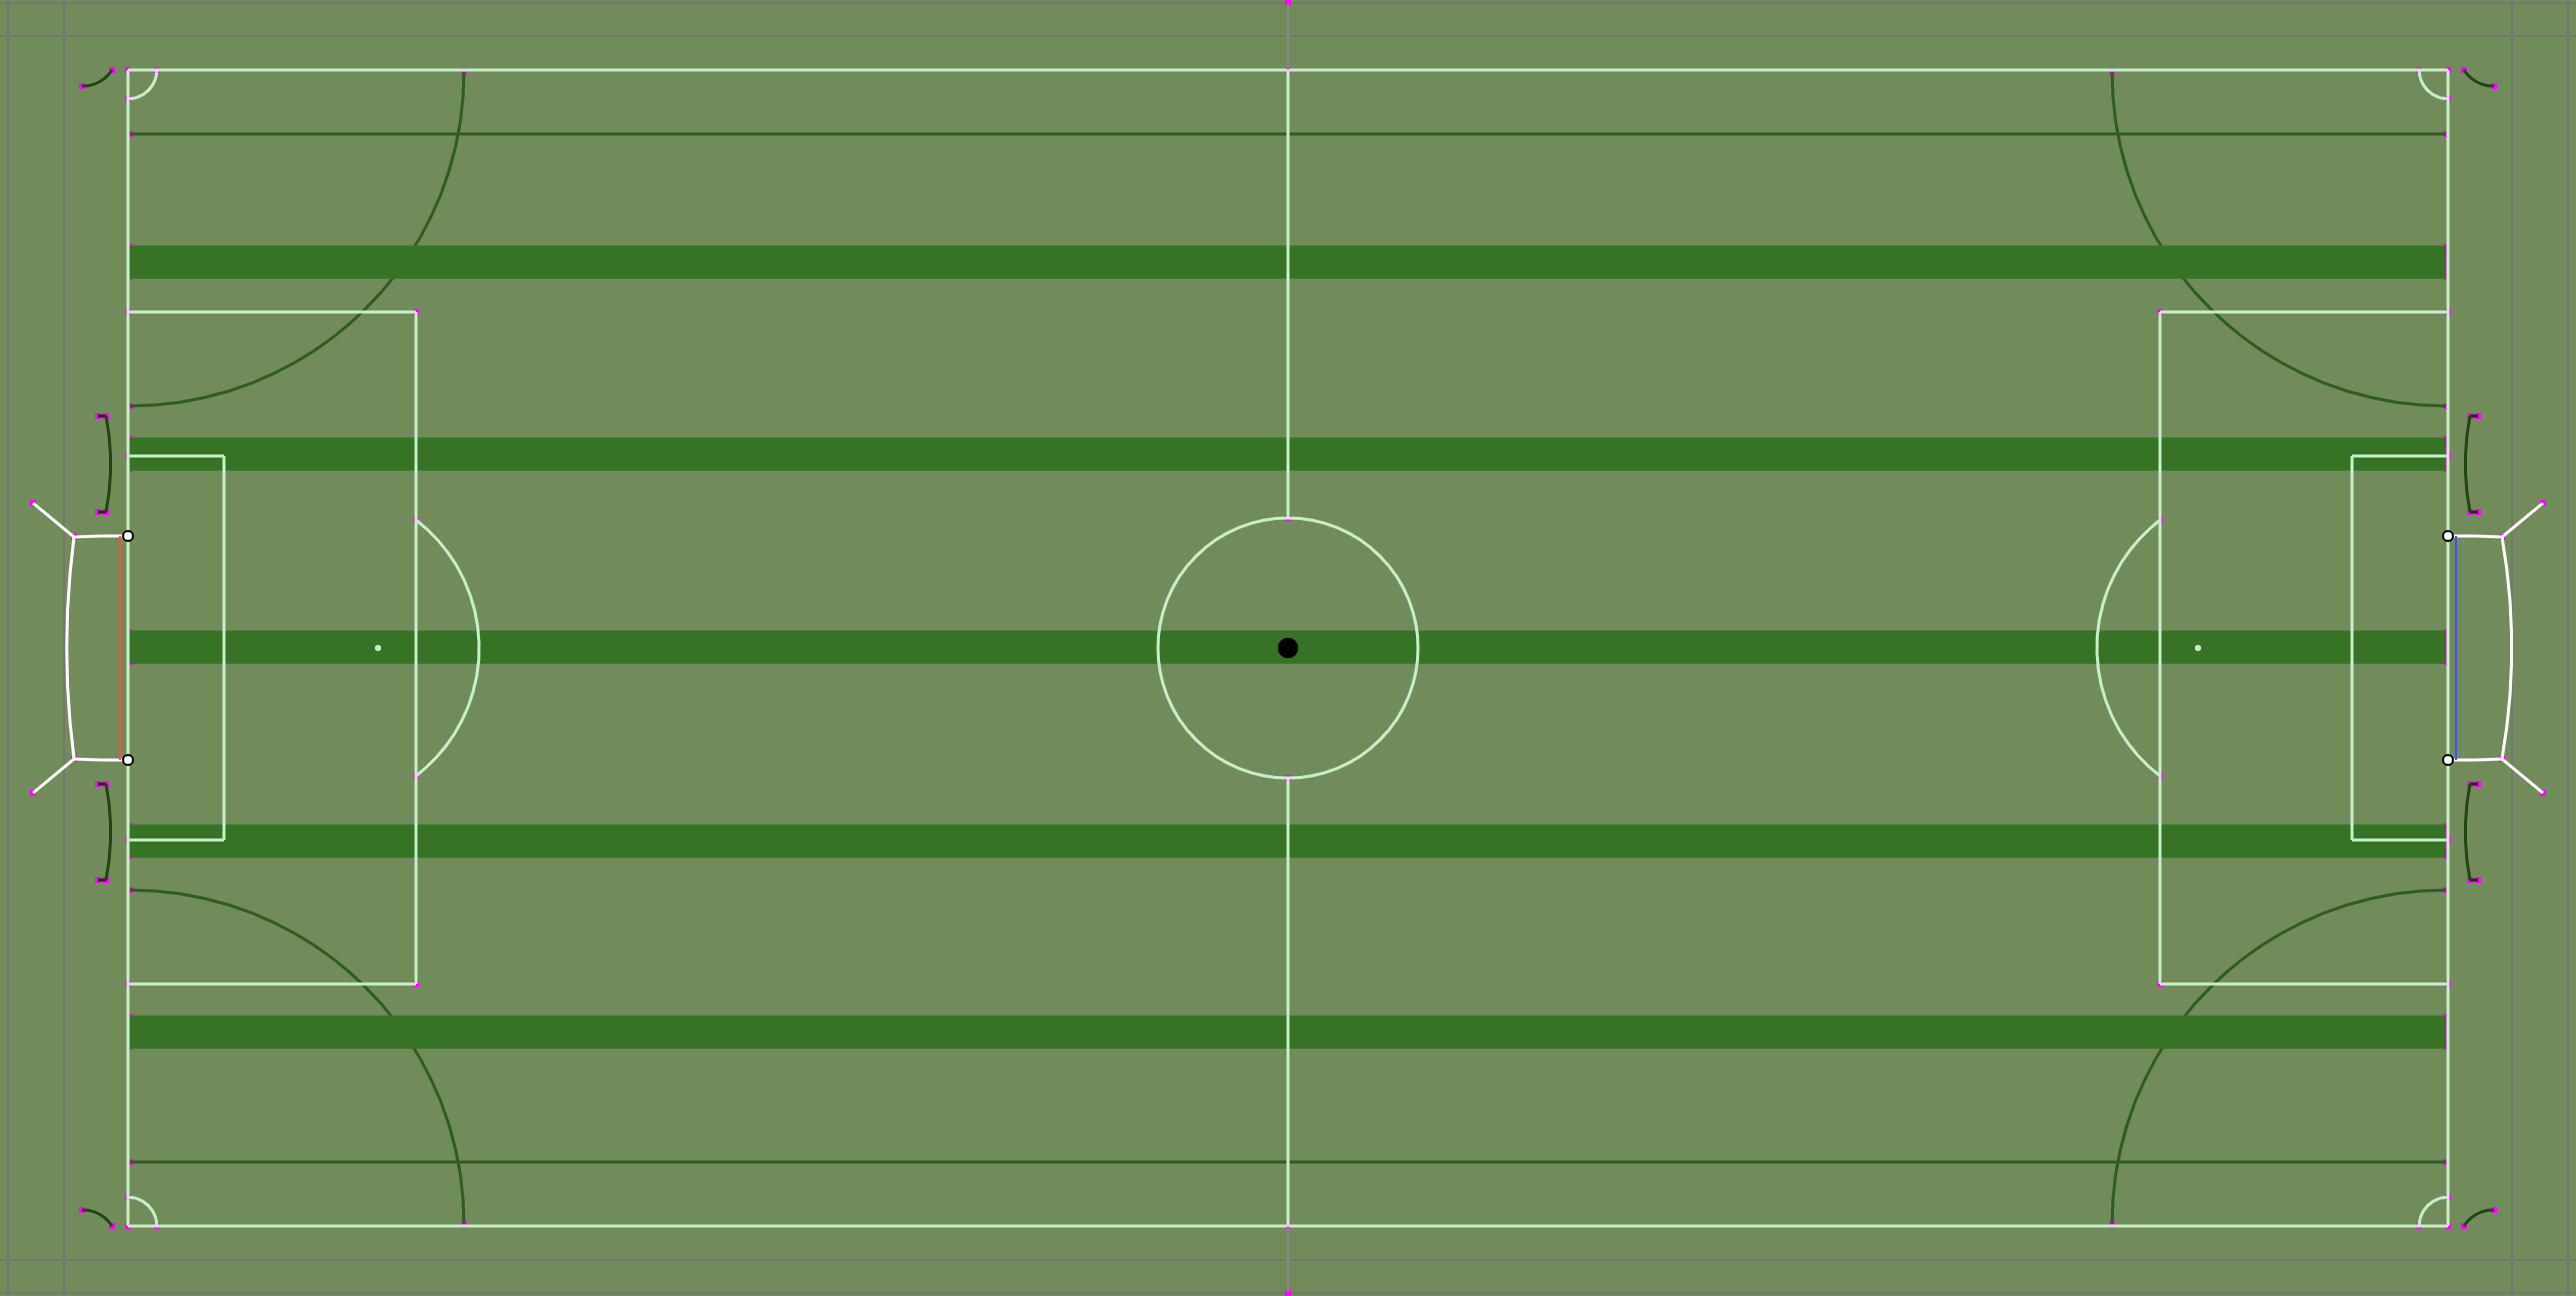 haxball maps | Real Soccer V4 Super Striped Field